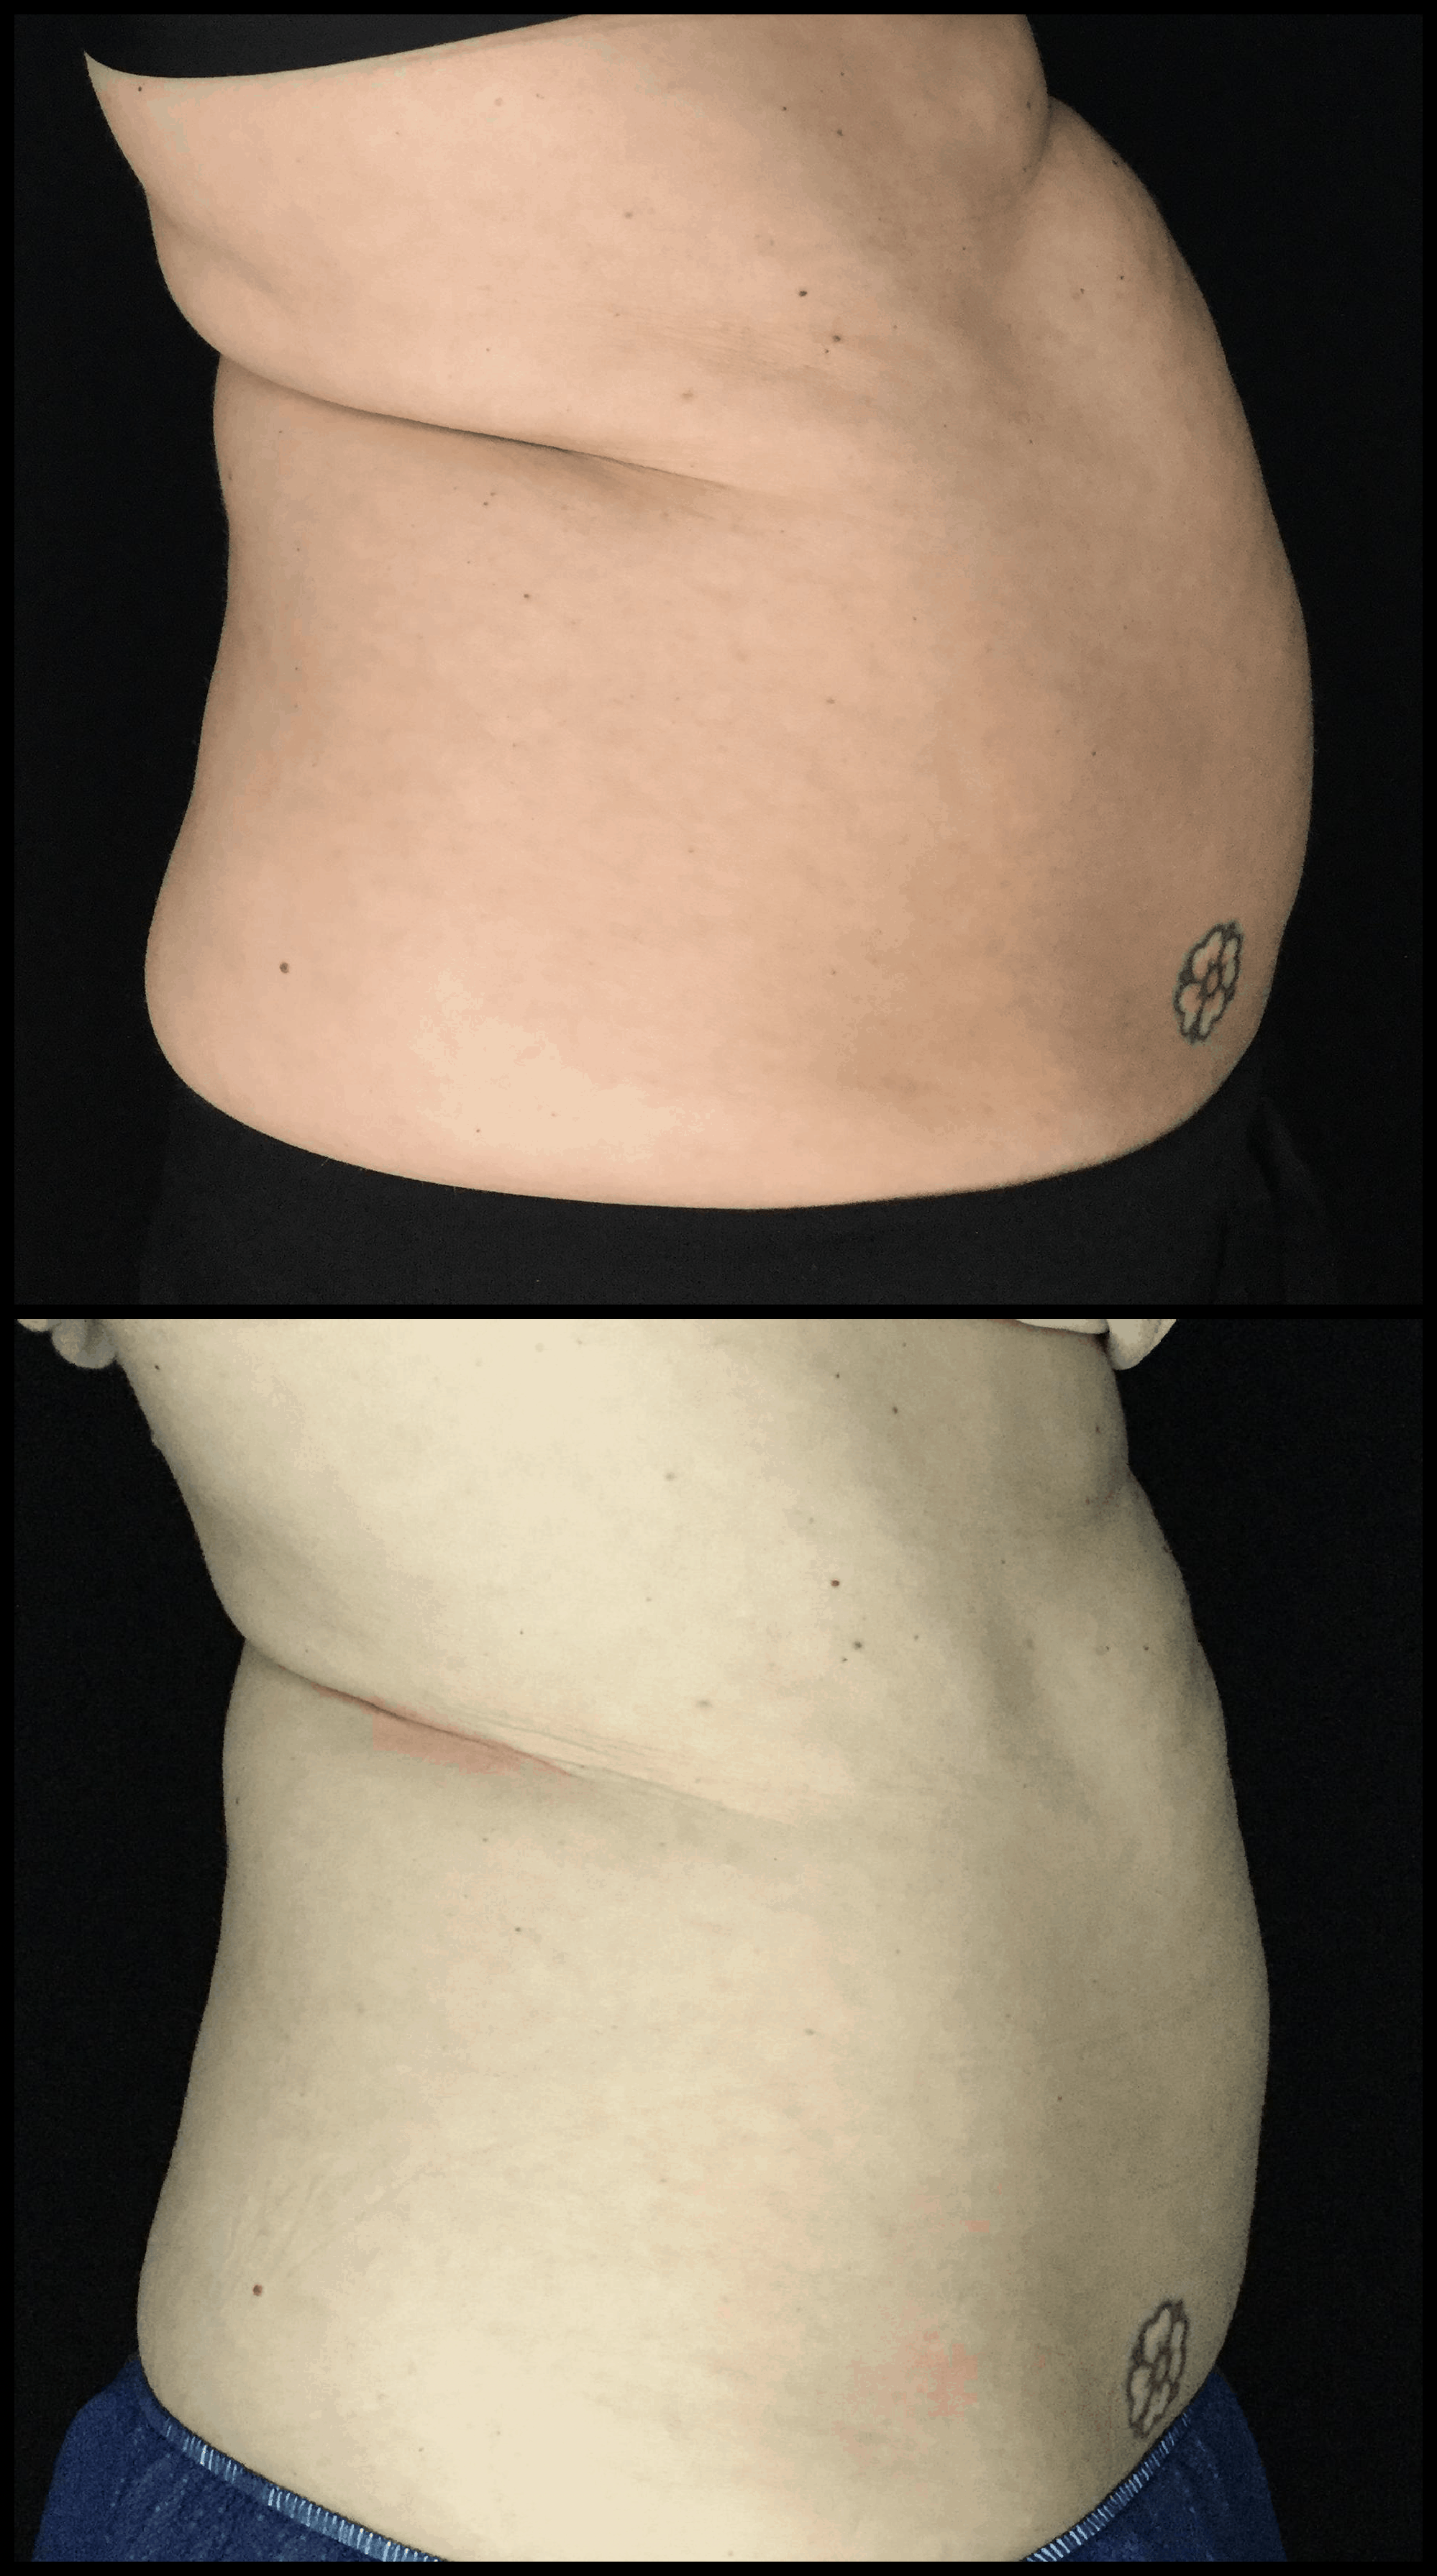 Before and After Coolsculpting Results - Sheer Sculpt